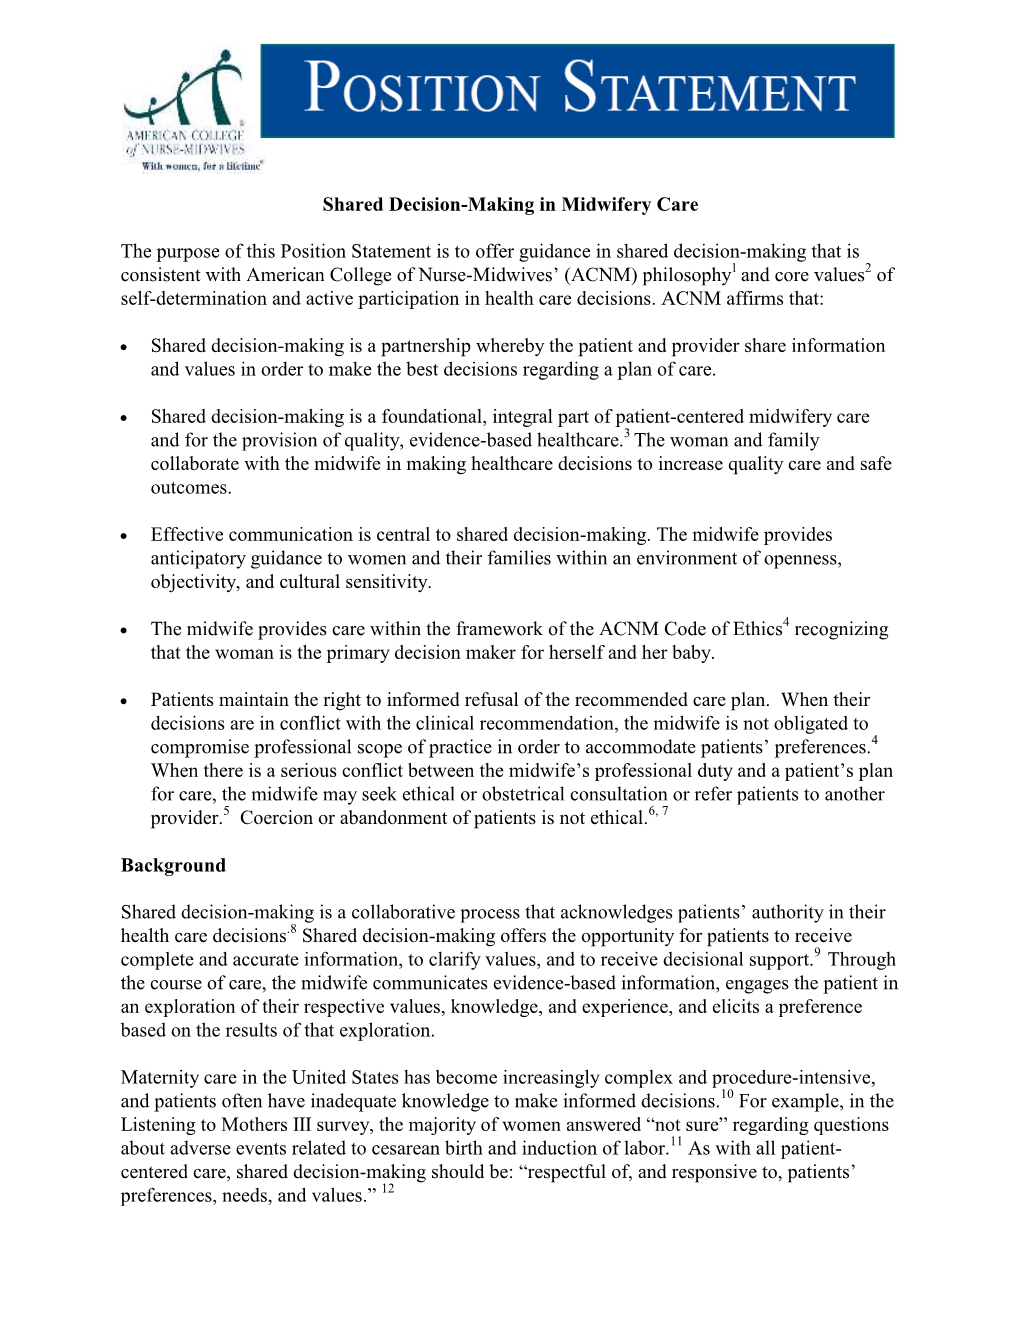 Shared Decision-Making in Midwifery Care the Purpose of This Position Statement Is to Offer Guidance in Shared Decision-Making T